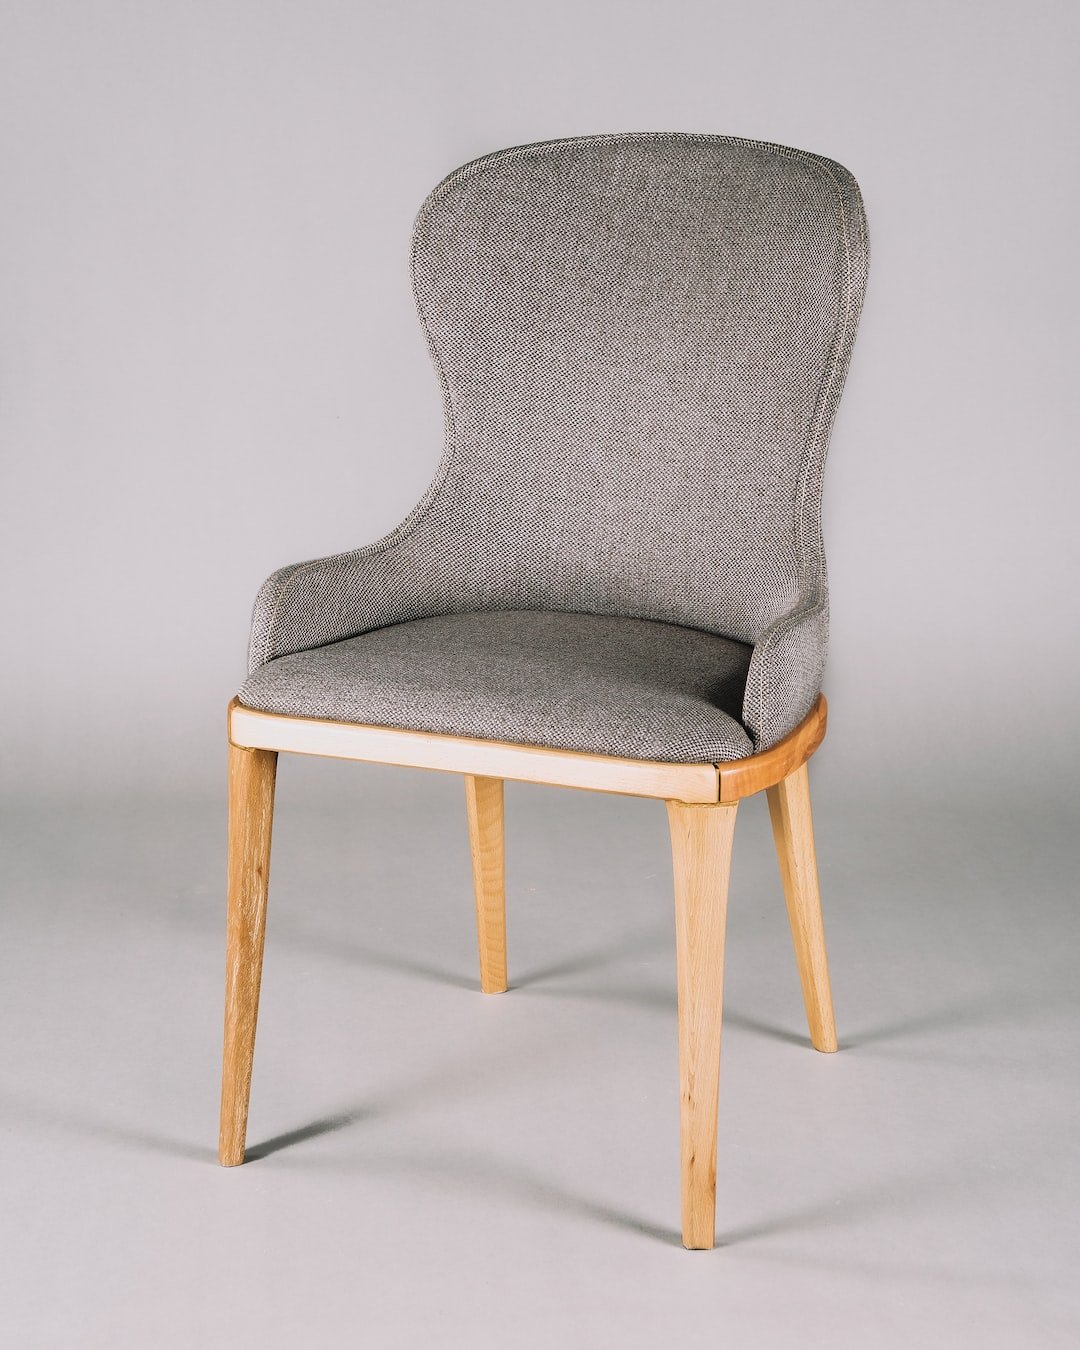 gray and white padded chair